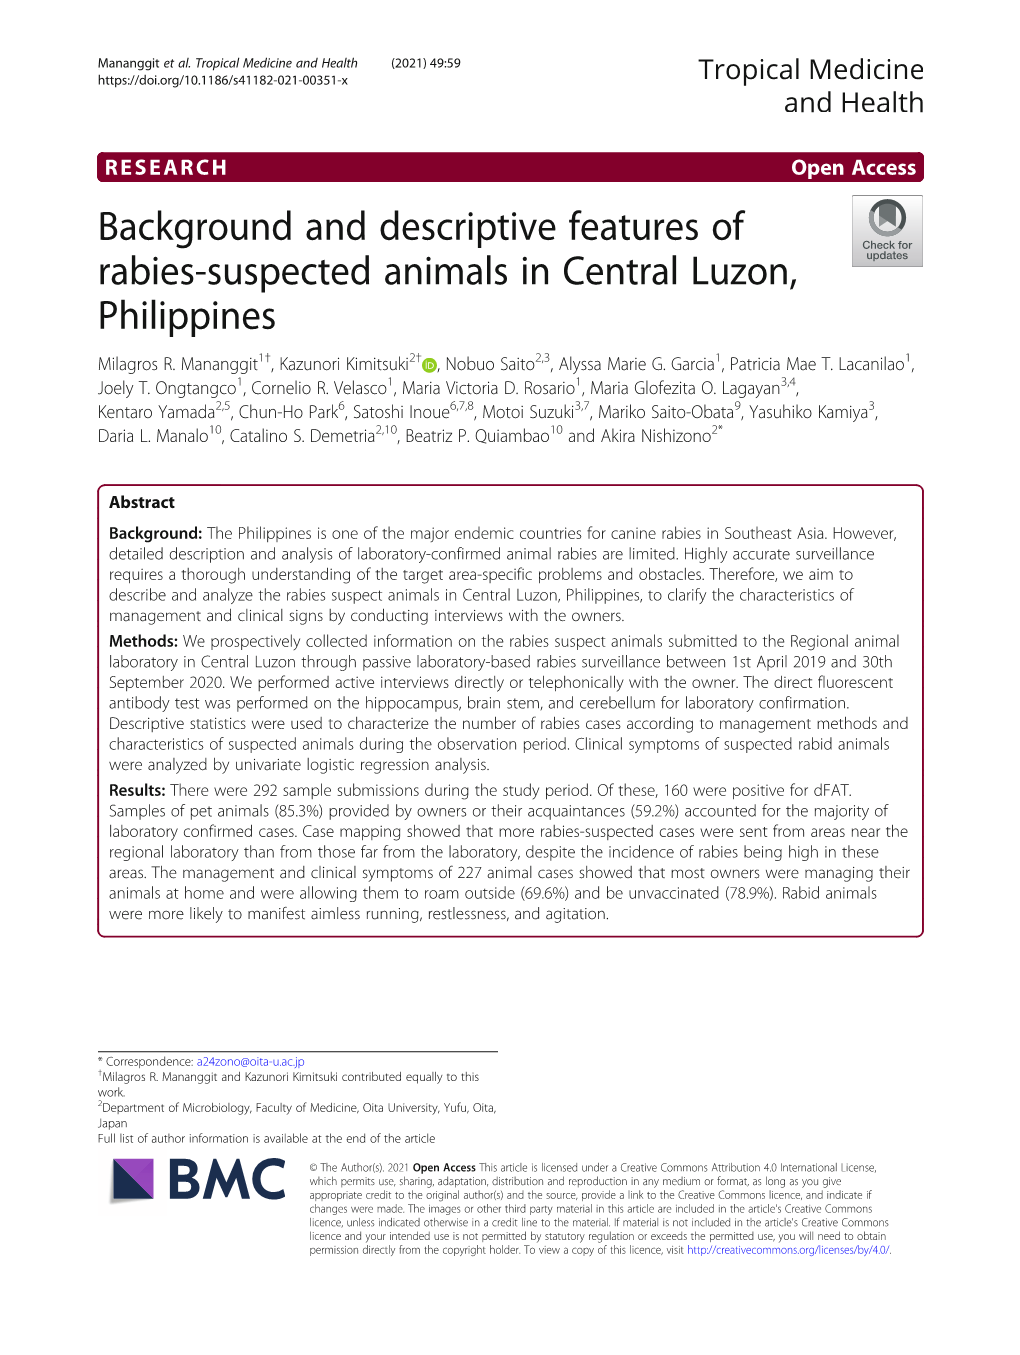 Background and Descriptive Features of Rabies-Suspected Animals in Central Luzon, Philippines Milagros R